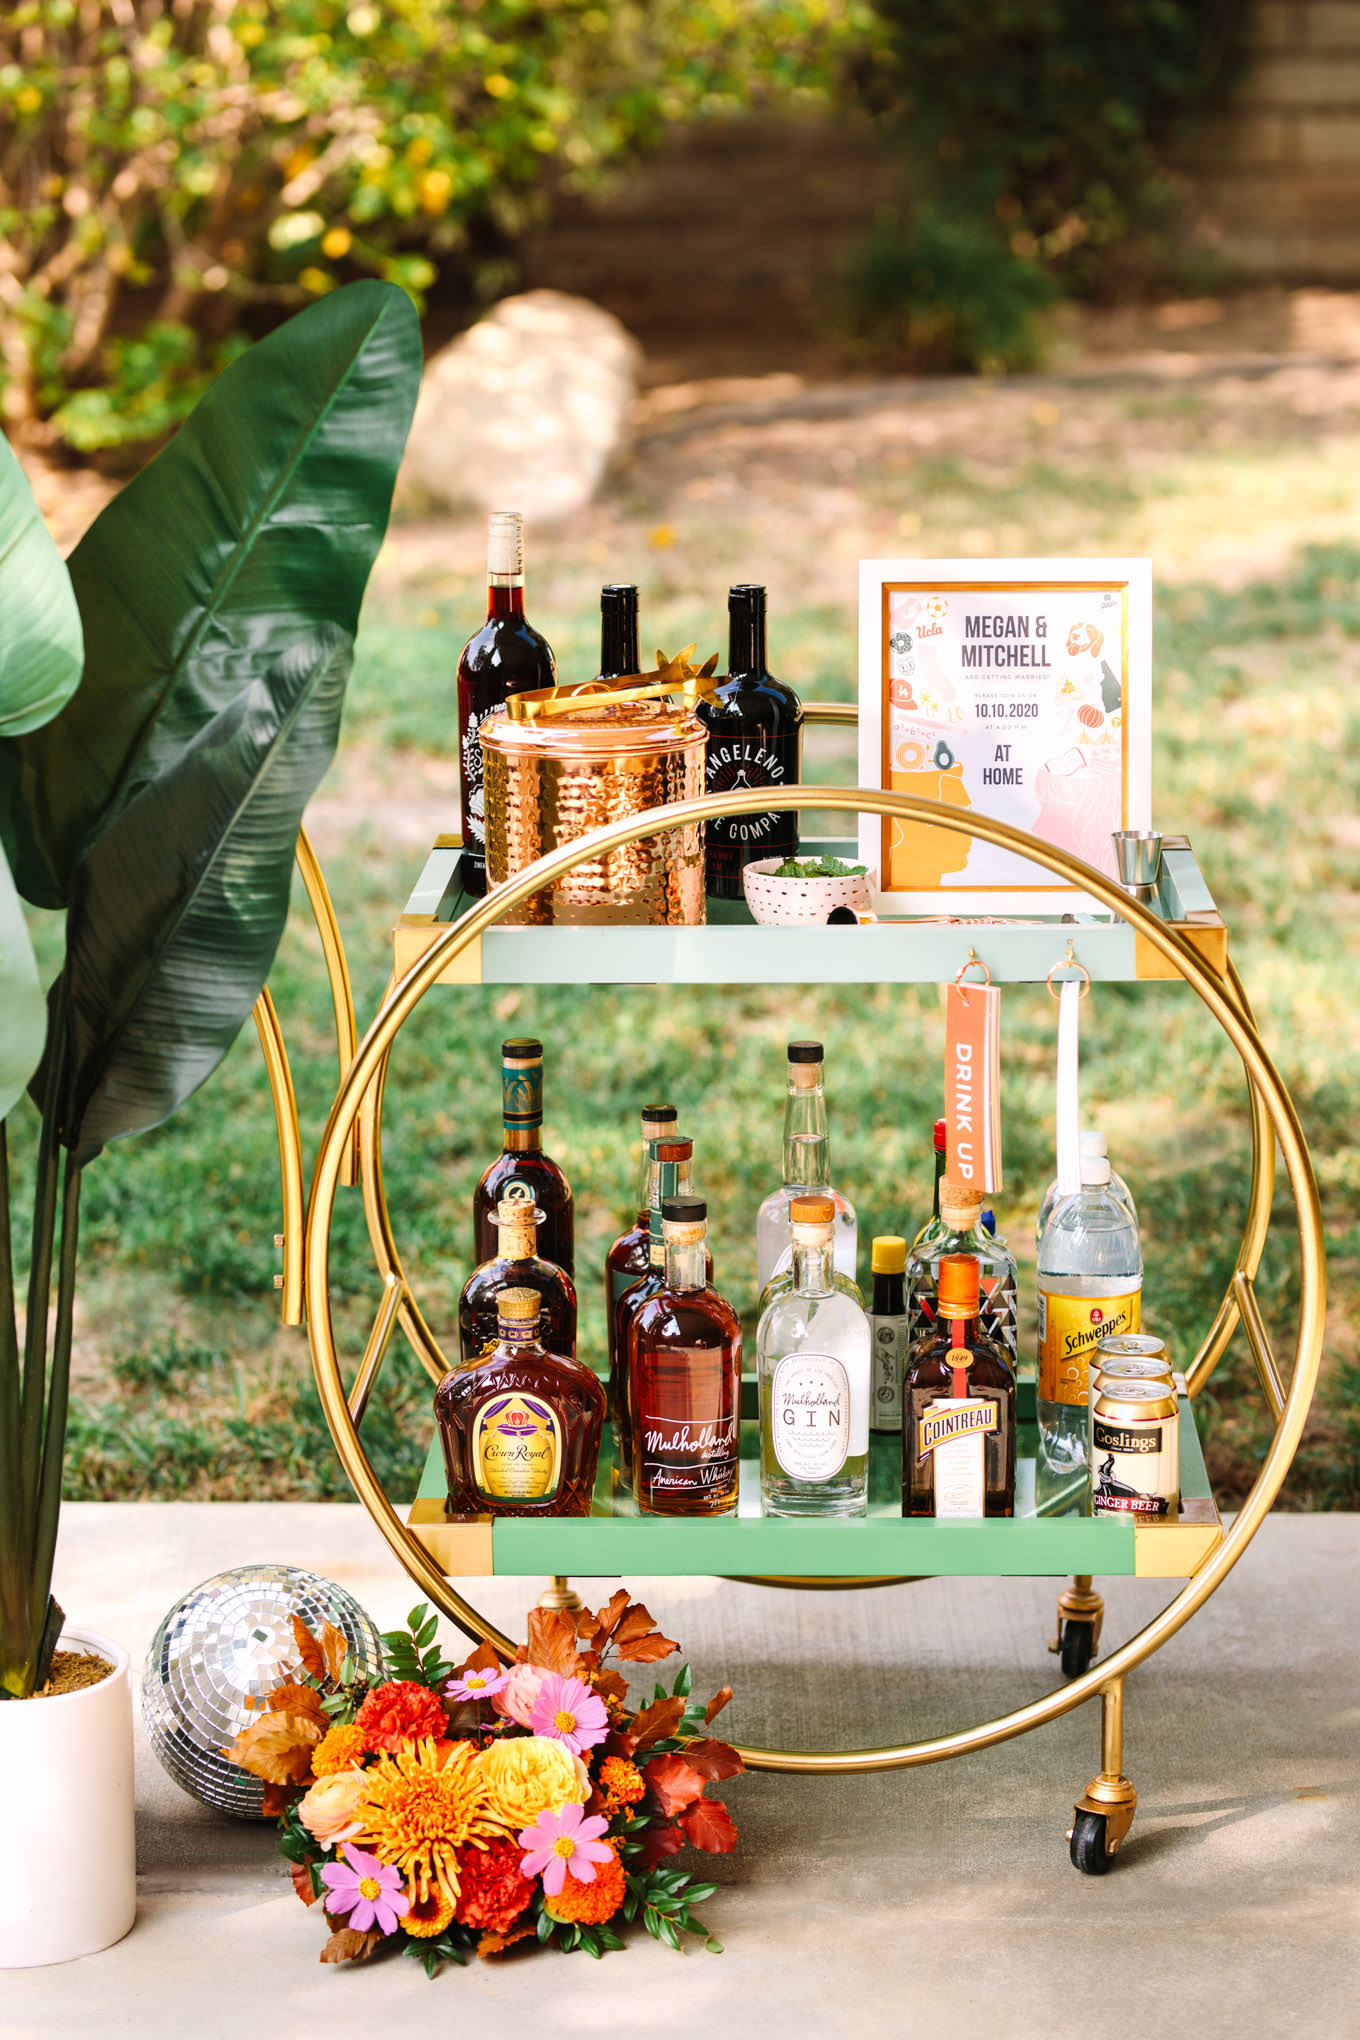 Unique beverage cart for wedding reception | Vibrant backyard micro wedding featured on Green Wedding Shoes | Colorful LA wedding photography | #losangeleswedding #backyardwedding #microwedding #laweddingphotographer Source: Mary Costa Photography | Los Angeles